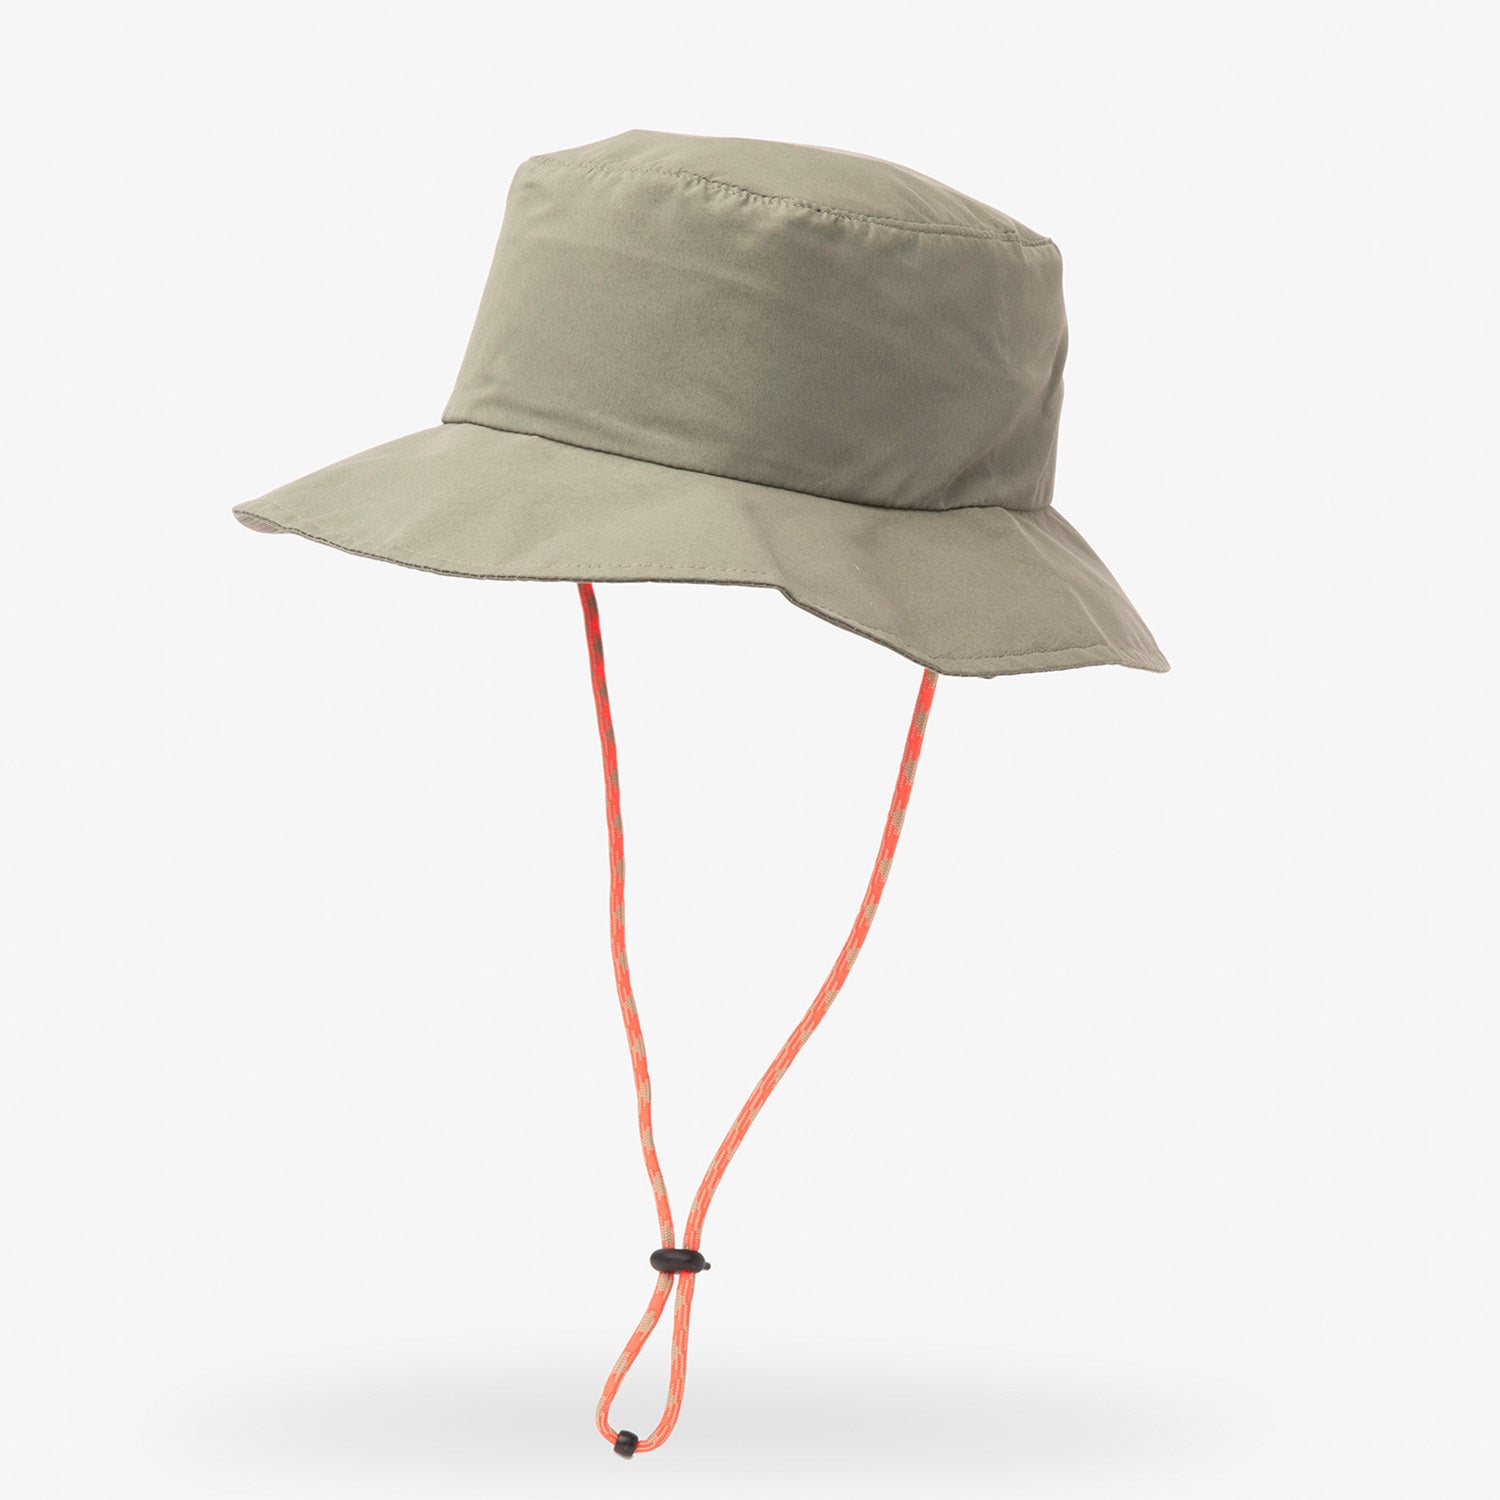 Cooling Bucket Hat for Performance | MISSION